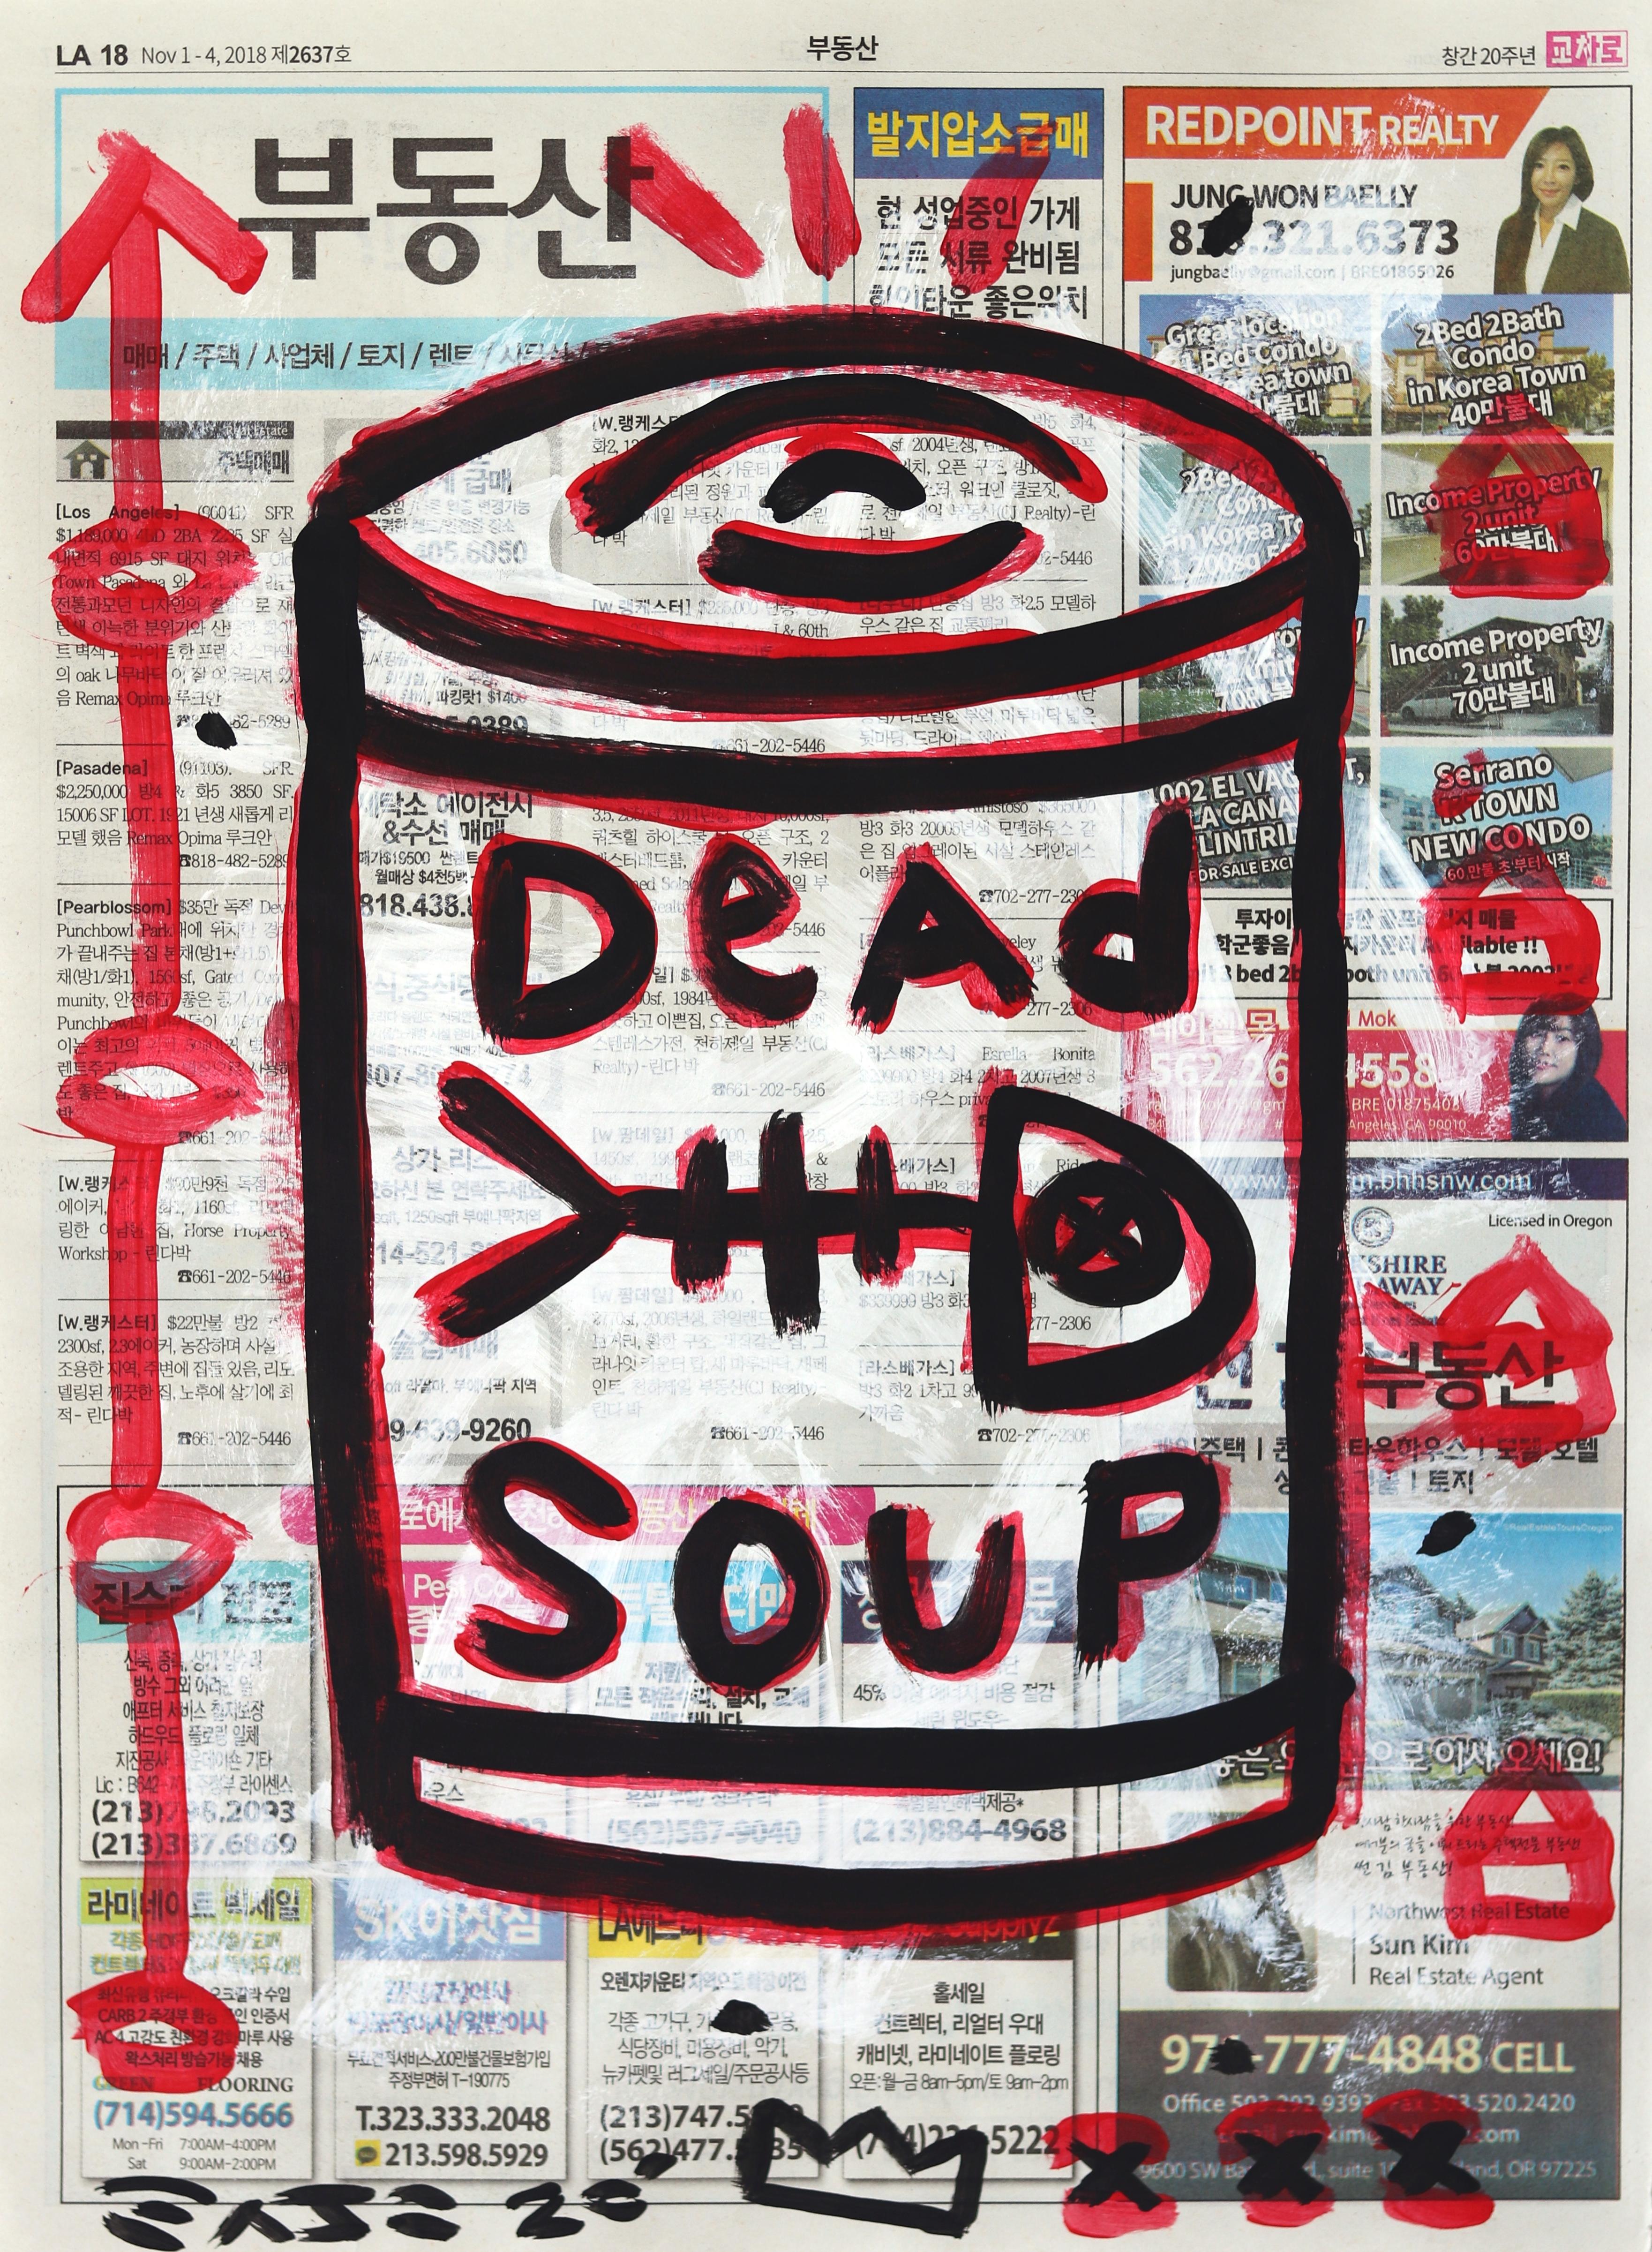 Gary John Figurative Painting - This Soup Is Not Alive - Black and Red Original Street Art on Newsprint